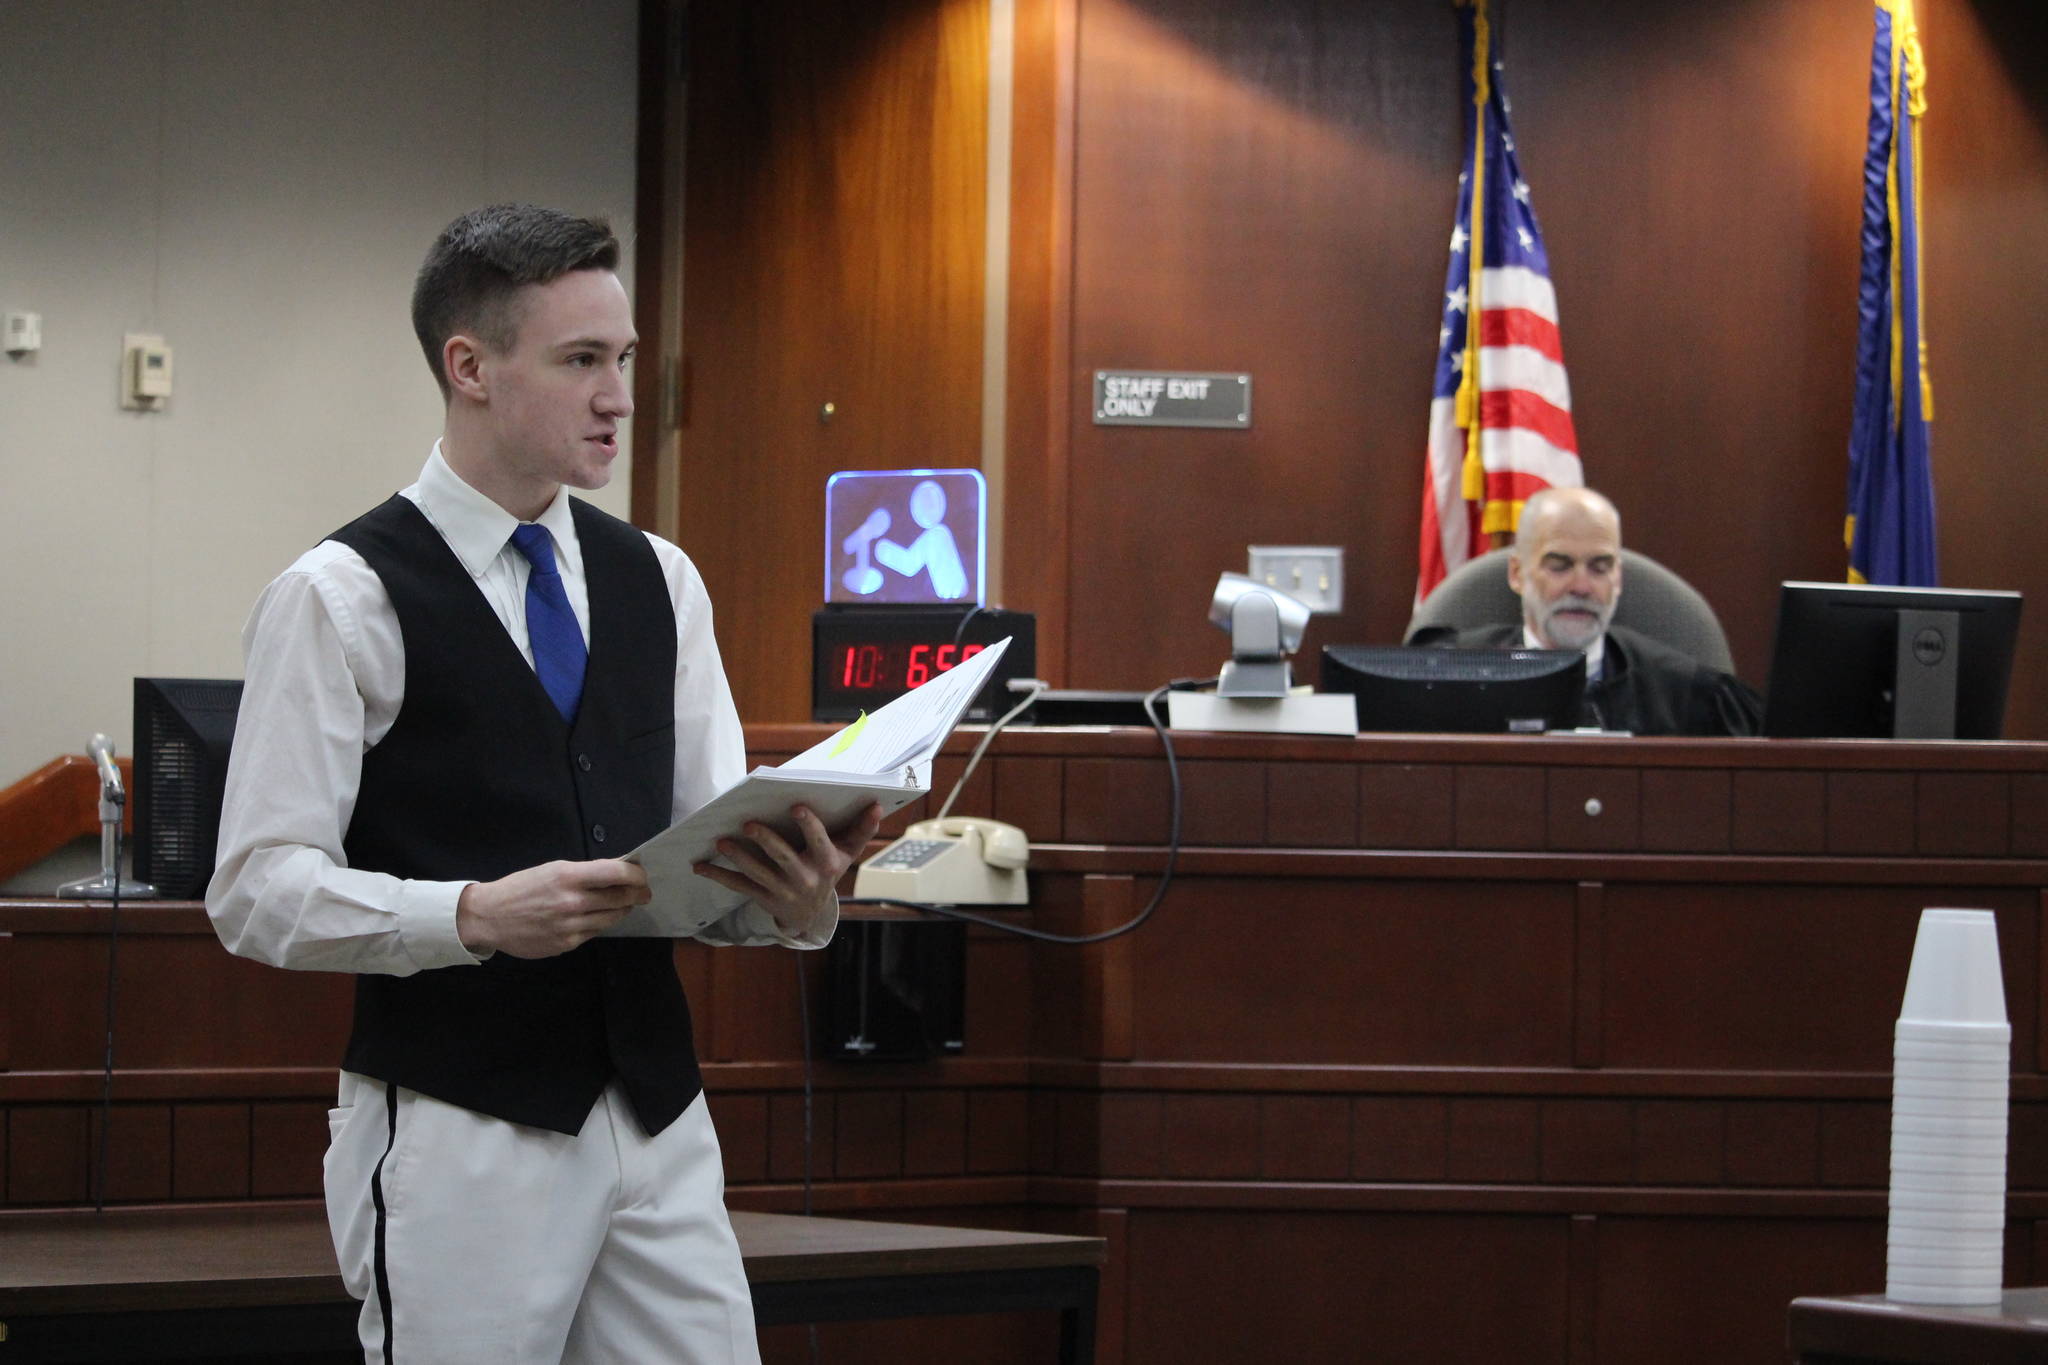 Nikiski Middle/High School senior Bryan McCollum, in his role as defense attorney, gives an opening statement to the jury during a mock trial at the Kenai Courthouse on Dec. 3, 2019. (Photo by Brian Mazurek/Peninsula Clarion)